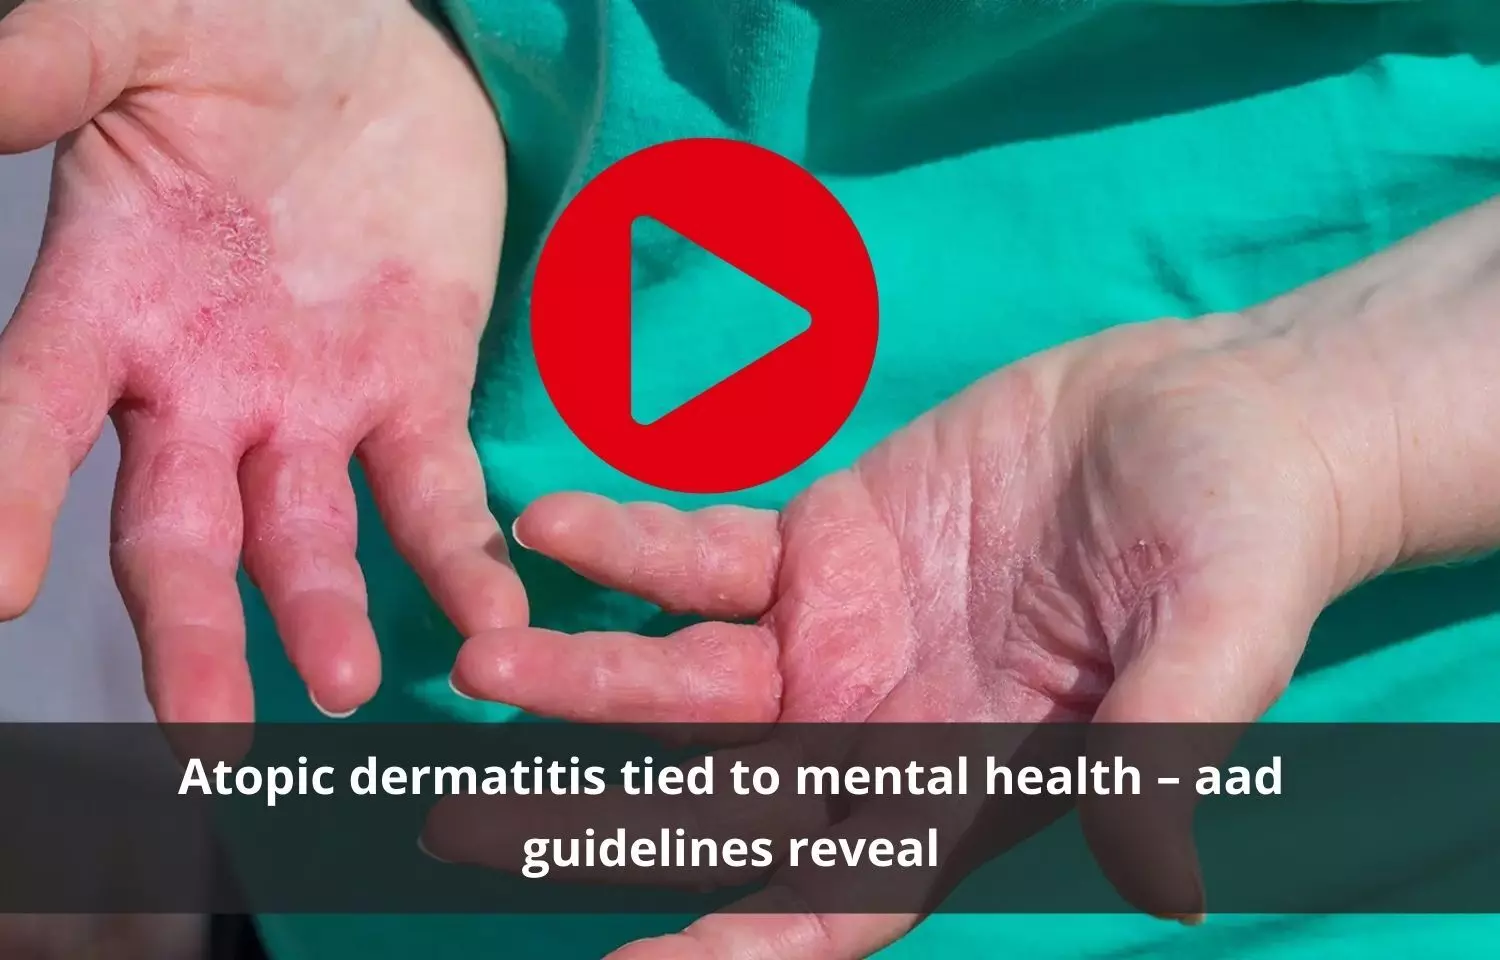 Atopic dermatitis associated to affect mental health